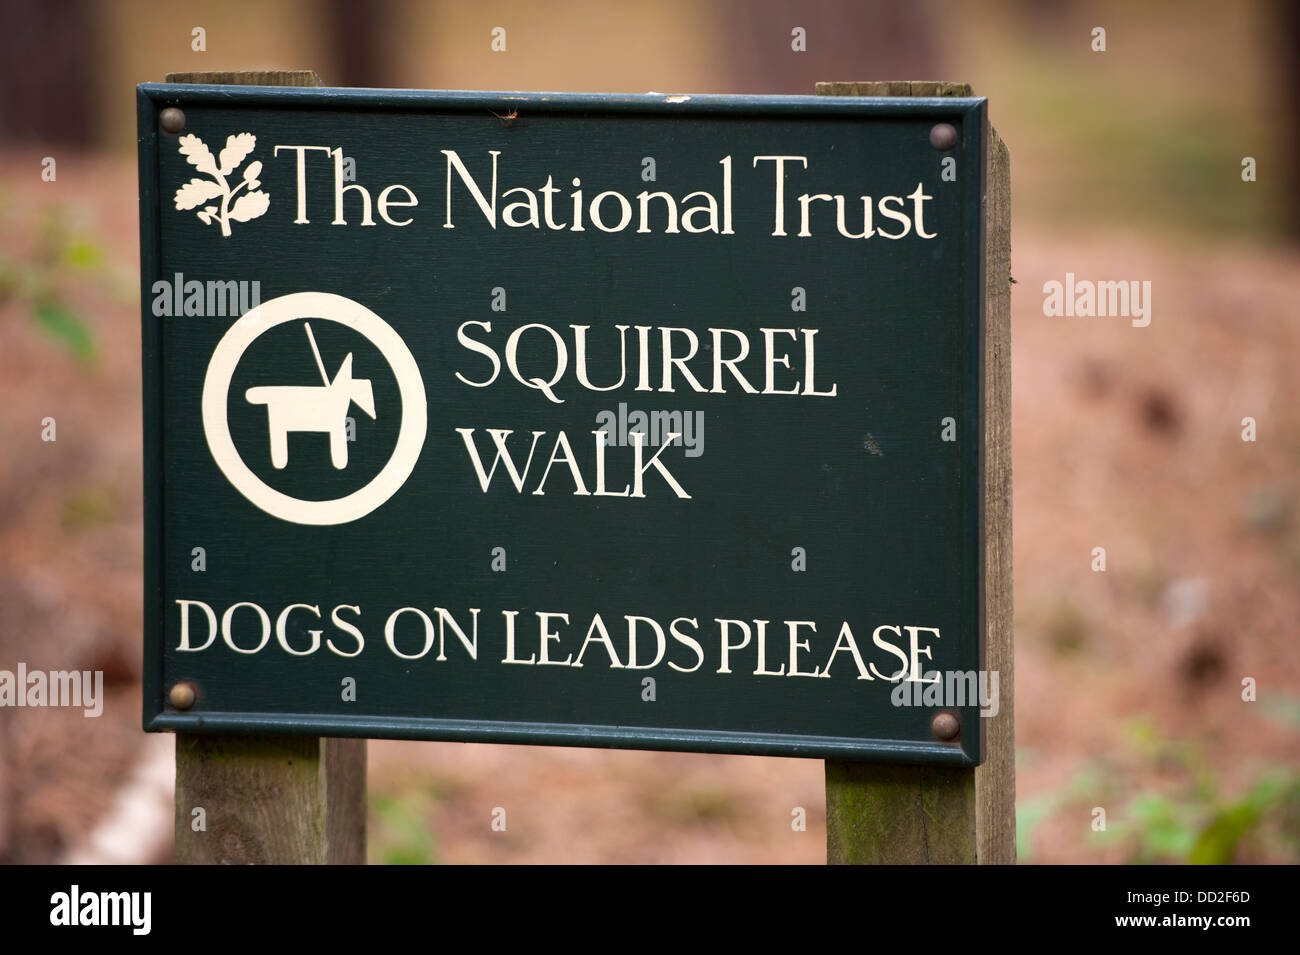 national trust squirrel walk formby beach sign Stock Photo